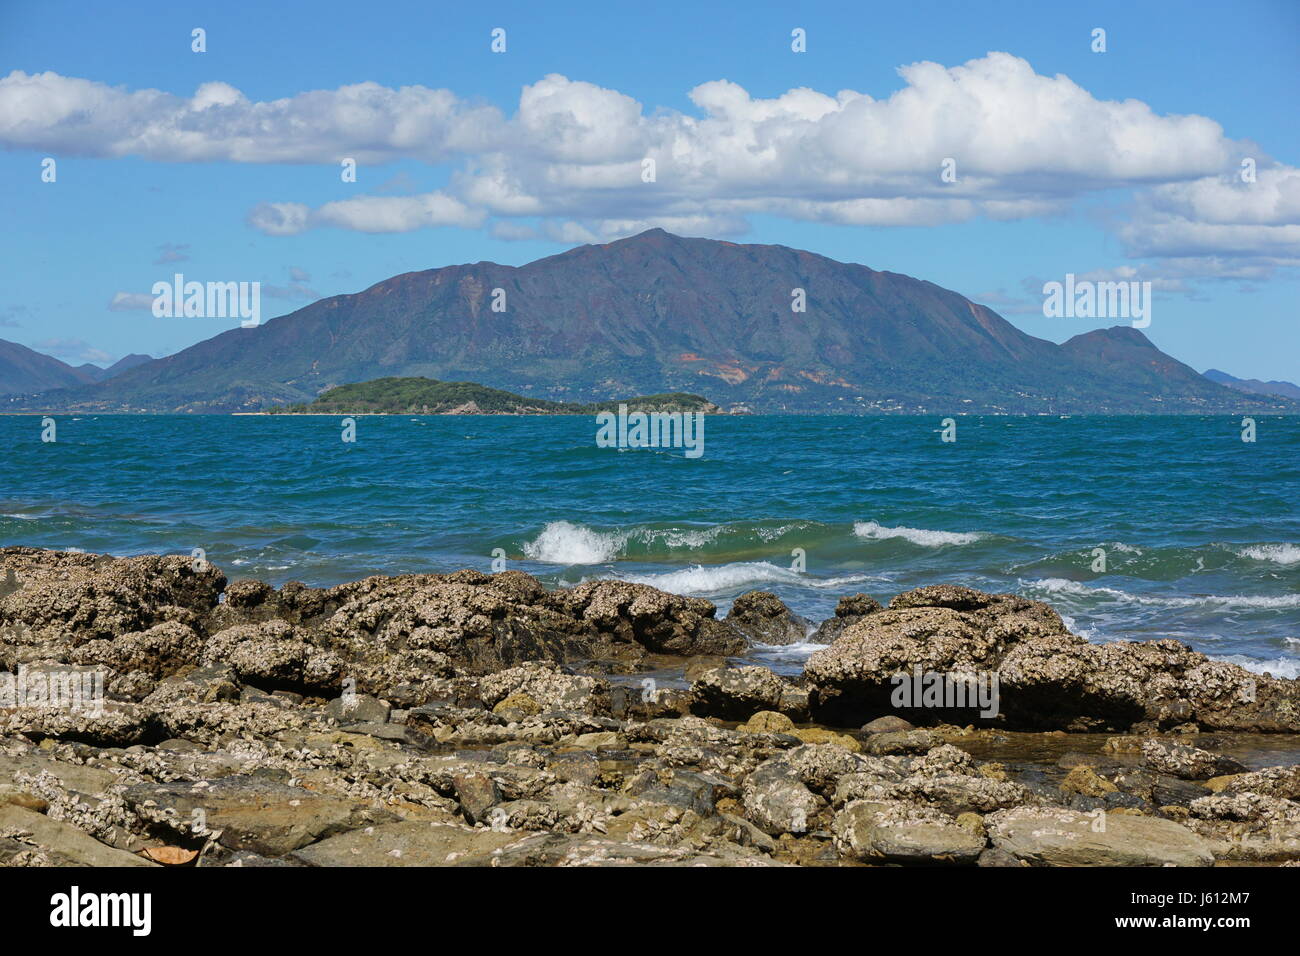 New Caledonia Grande Terre island coastal landscape with the mountain Mont Dore seen from Noumea, south Pacific, Oceania Stock Photo